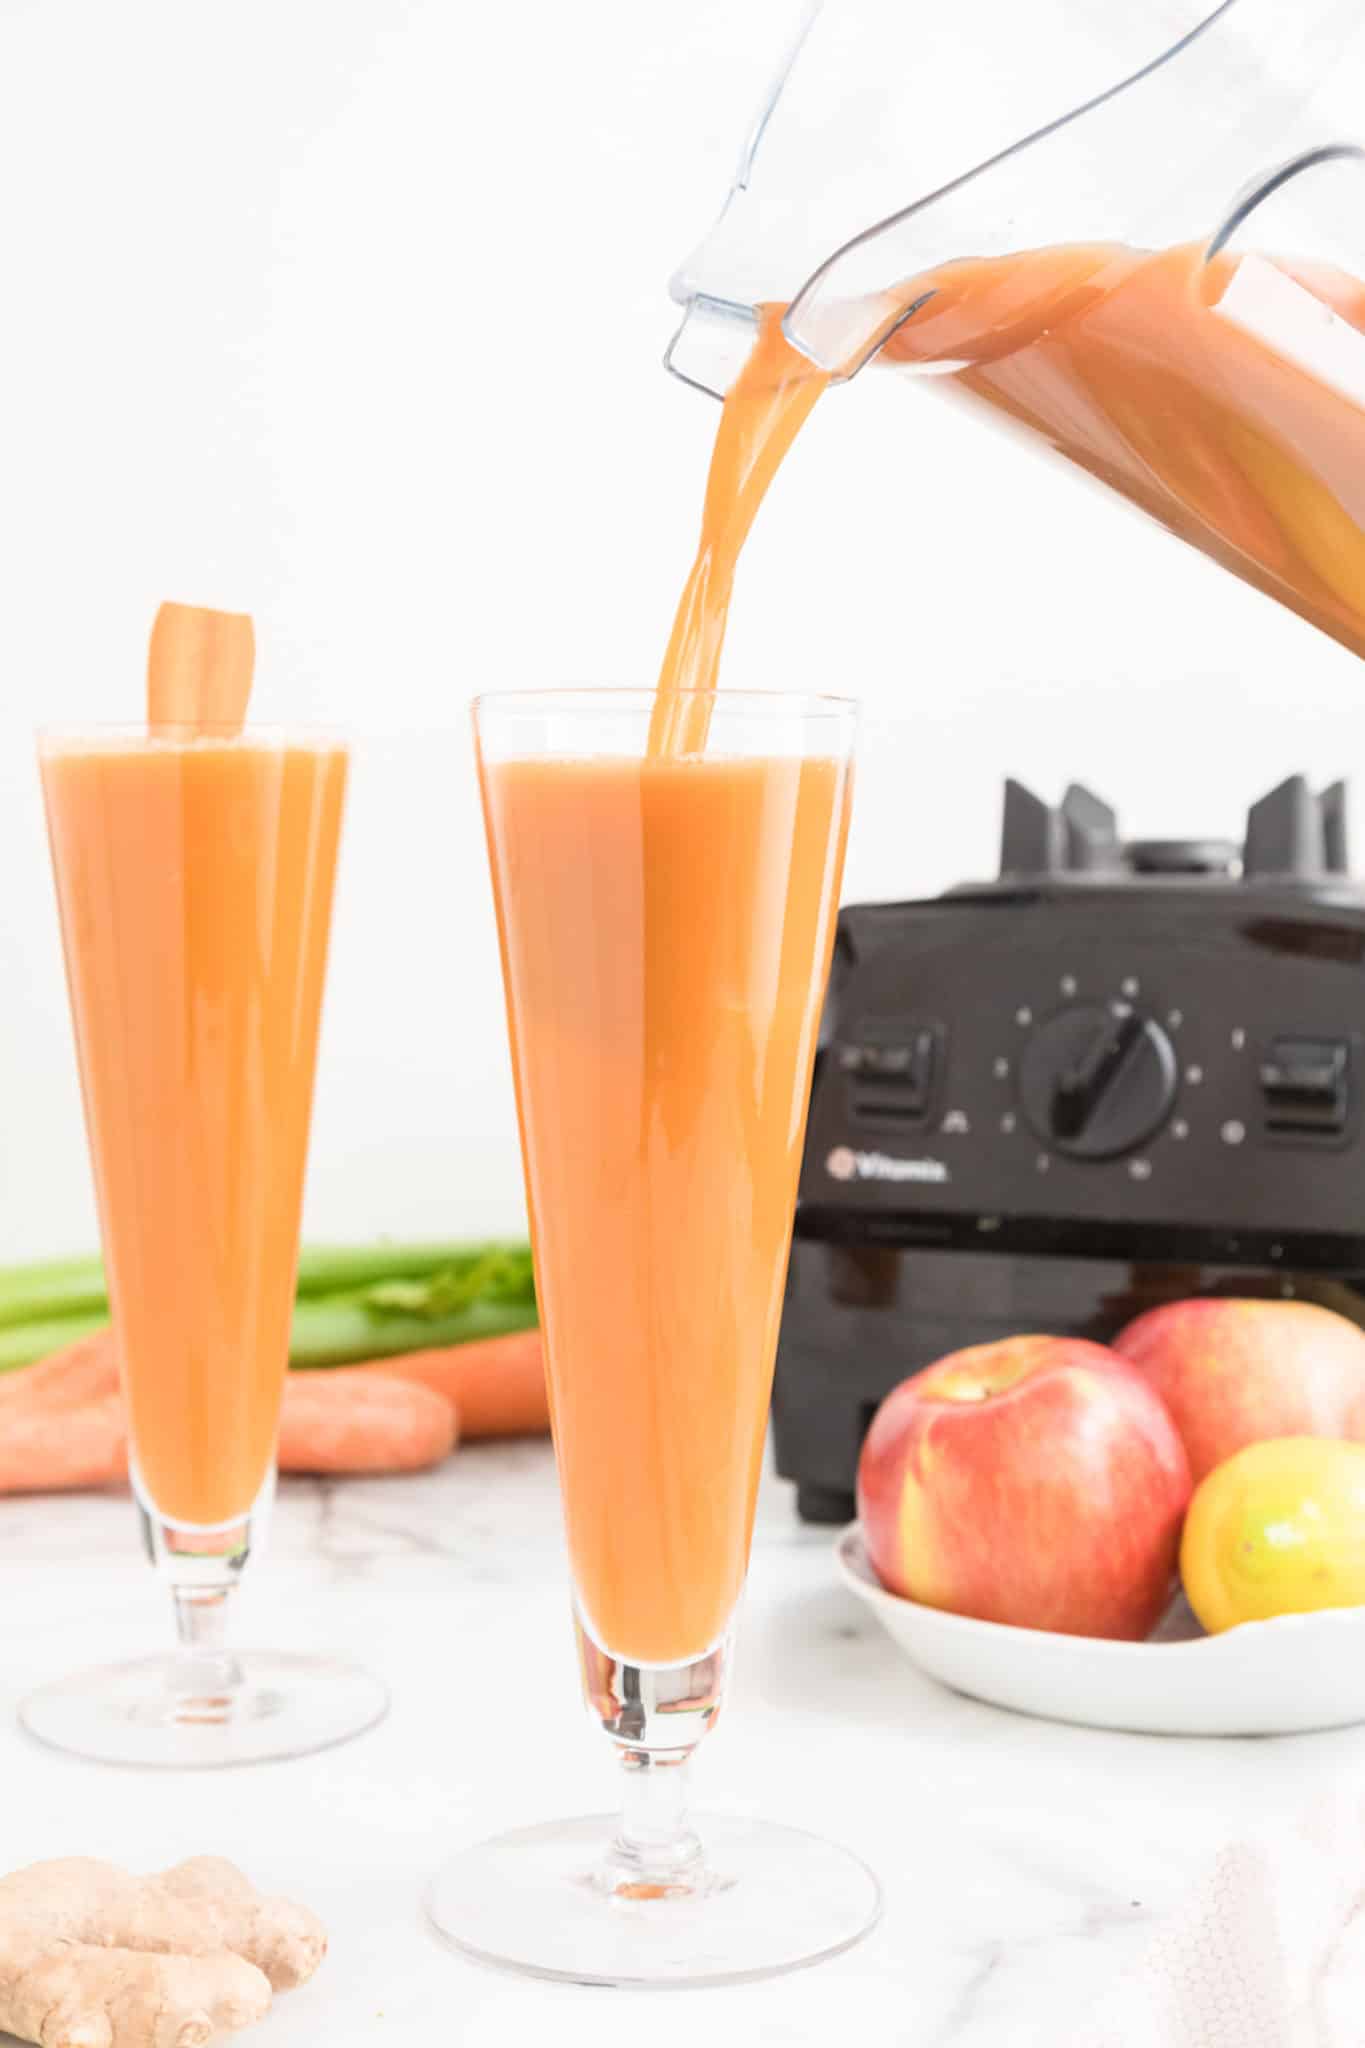 A blender pouring carrot celery juice into a glass.